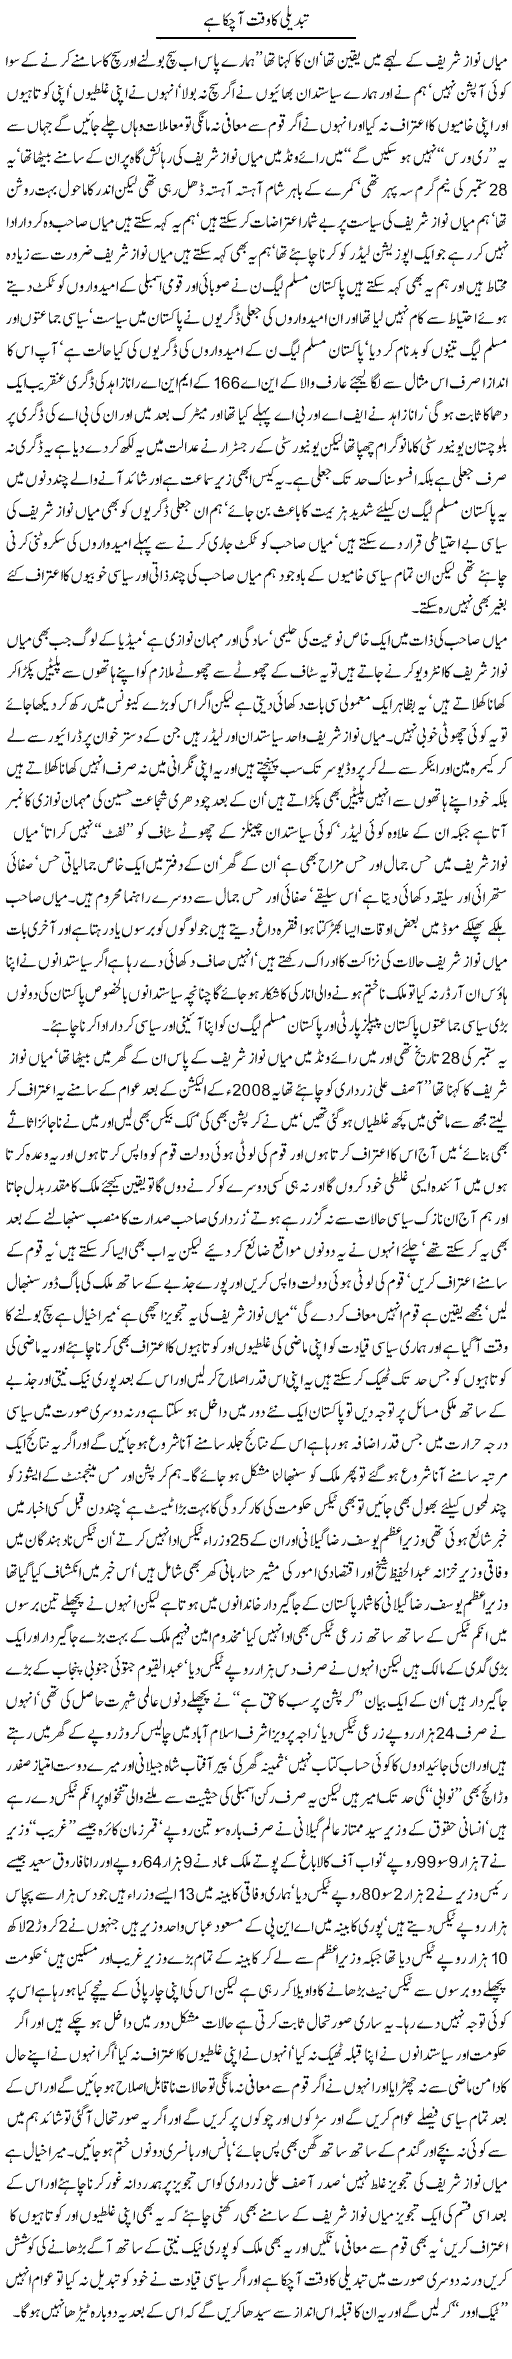 Time of Change Express Column Javed Chaudhry 30 September 2010